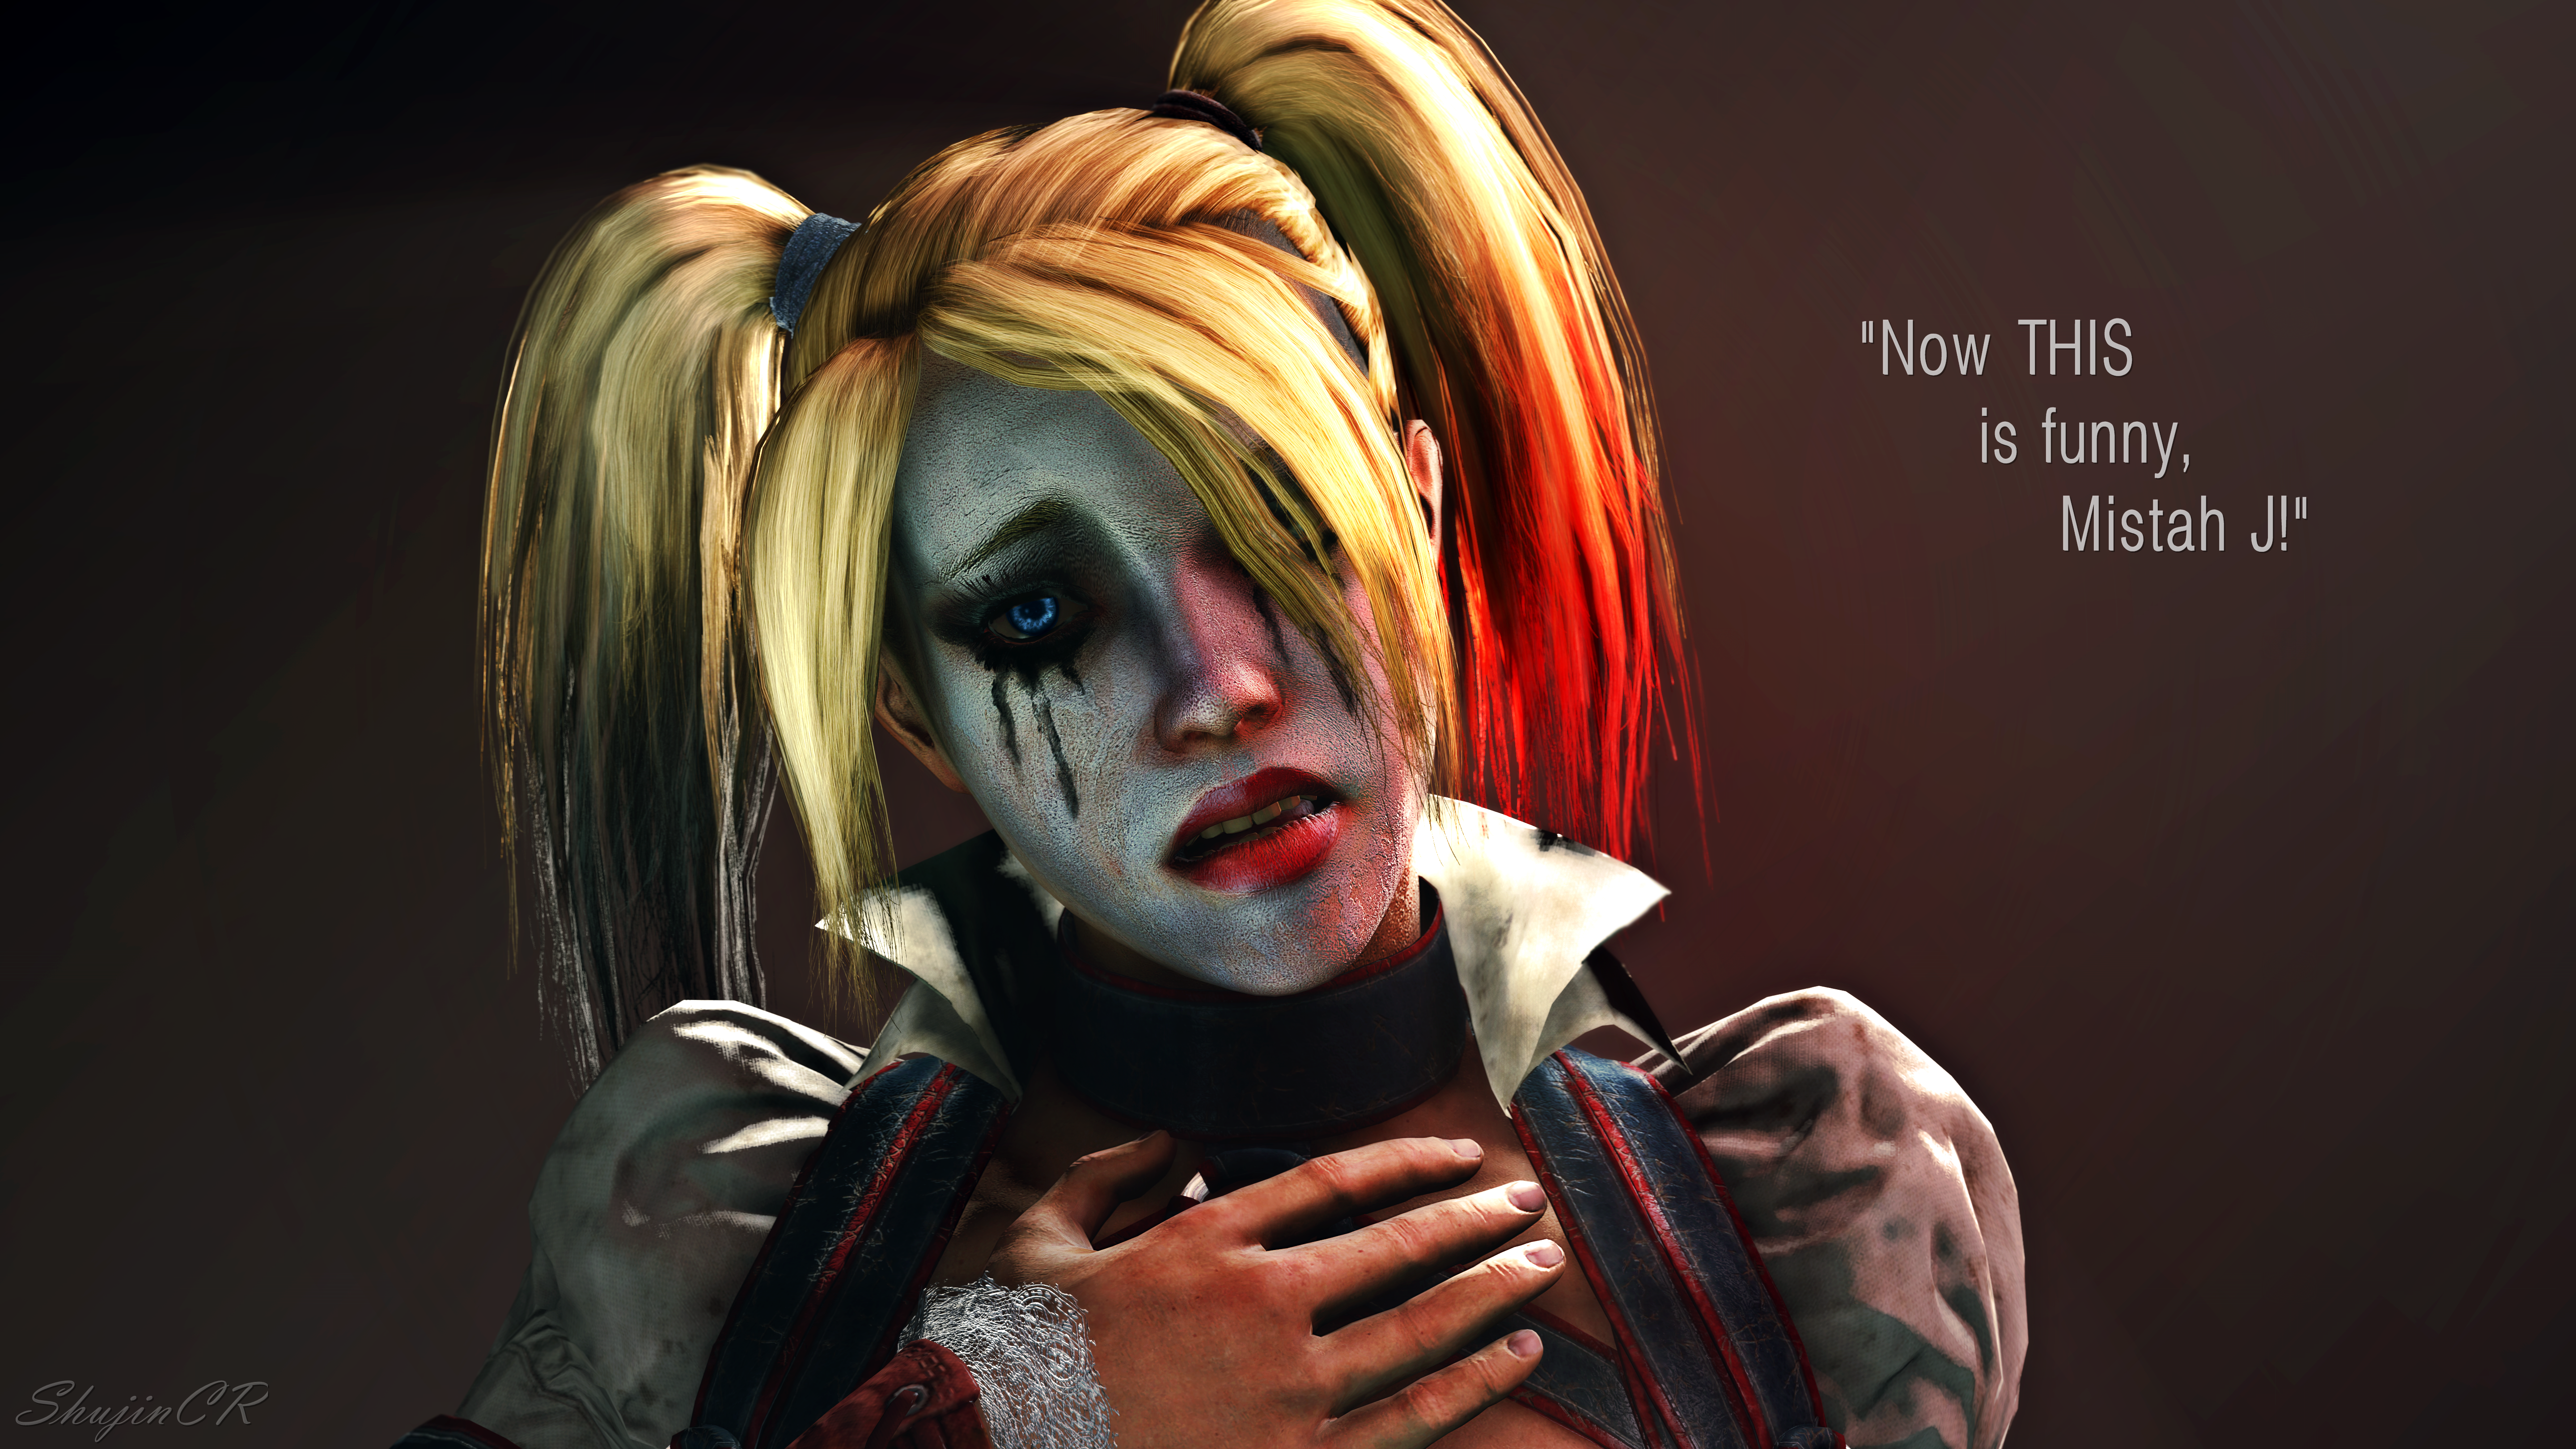 Harley's quote.